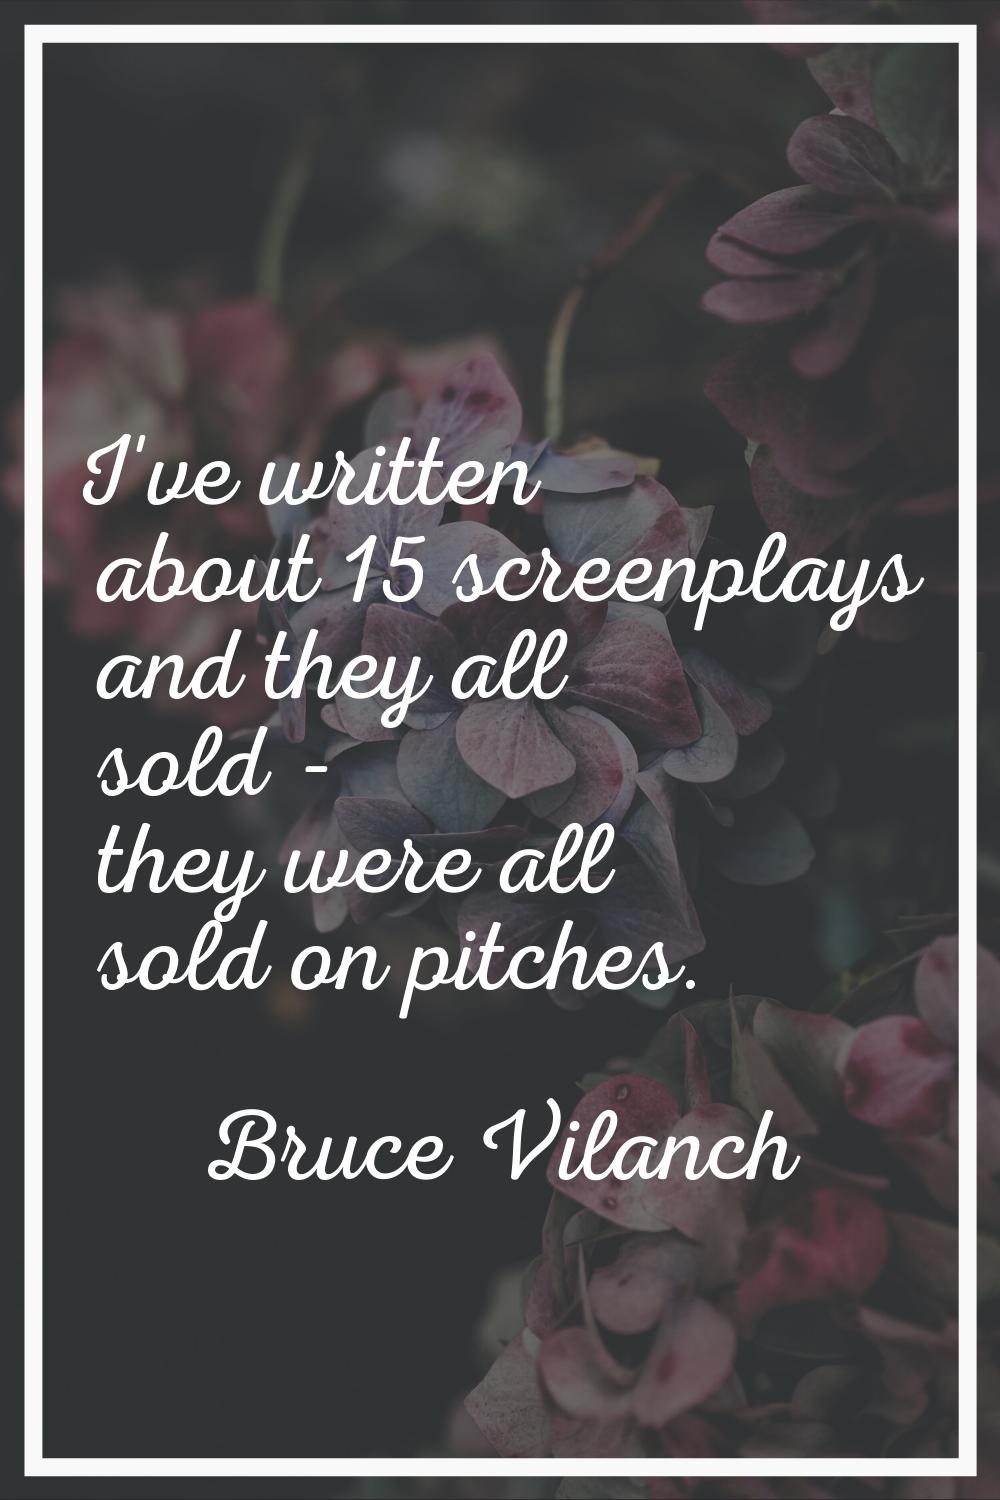 I've written about 15 screenplays and they all sold - they were all sold on pitches.